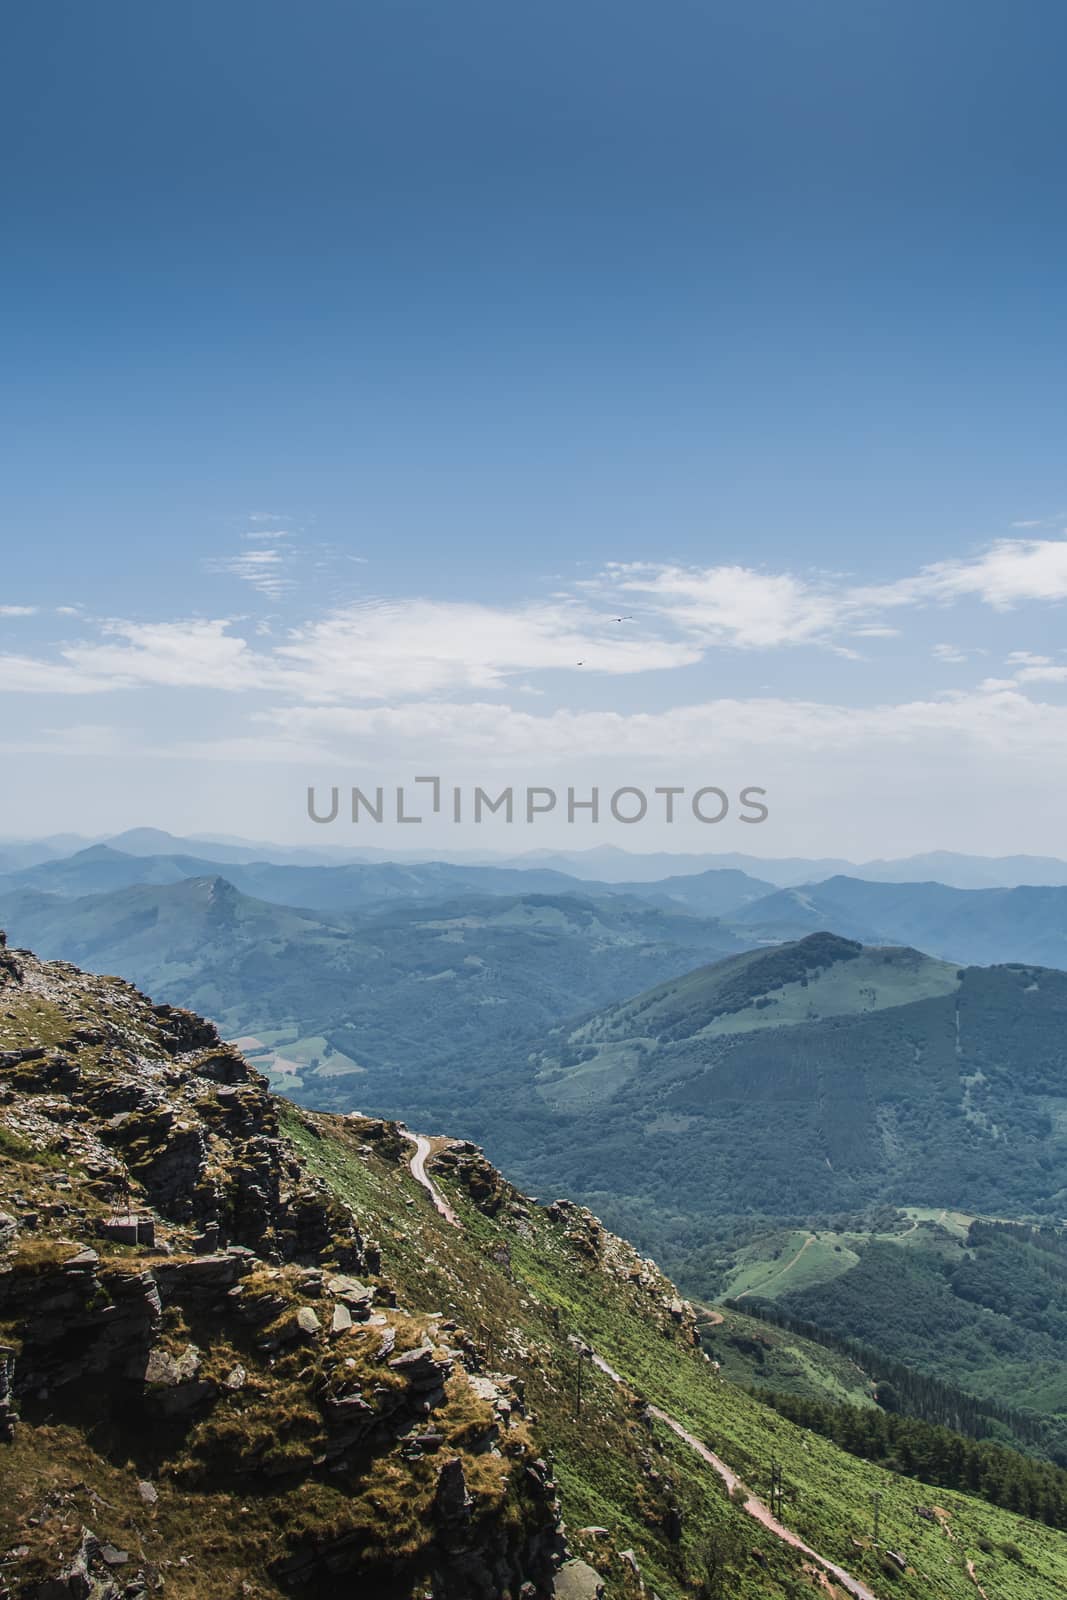 The Rhune mountain in the Pyrenees-Atlantique in France